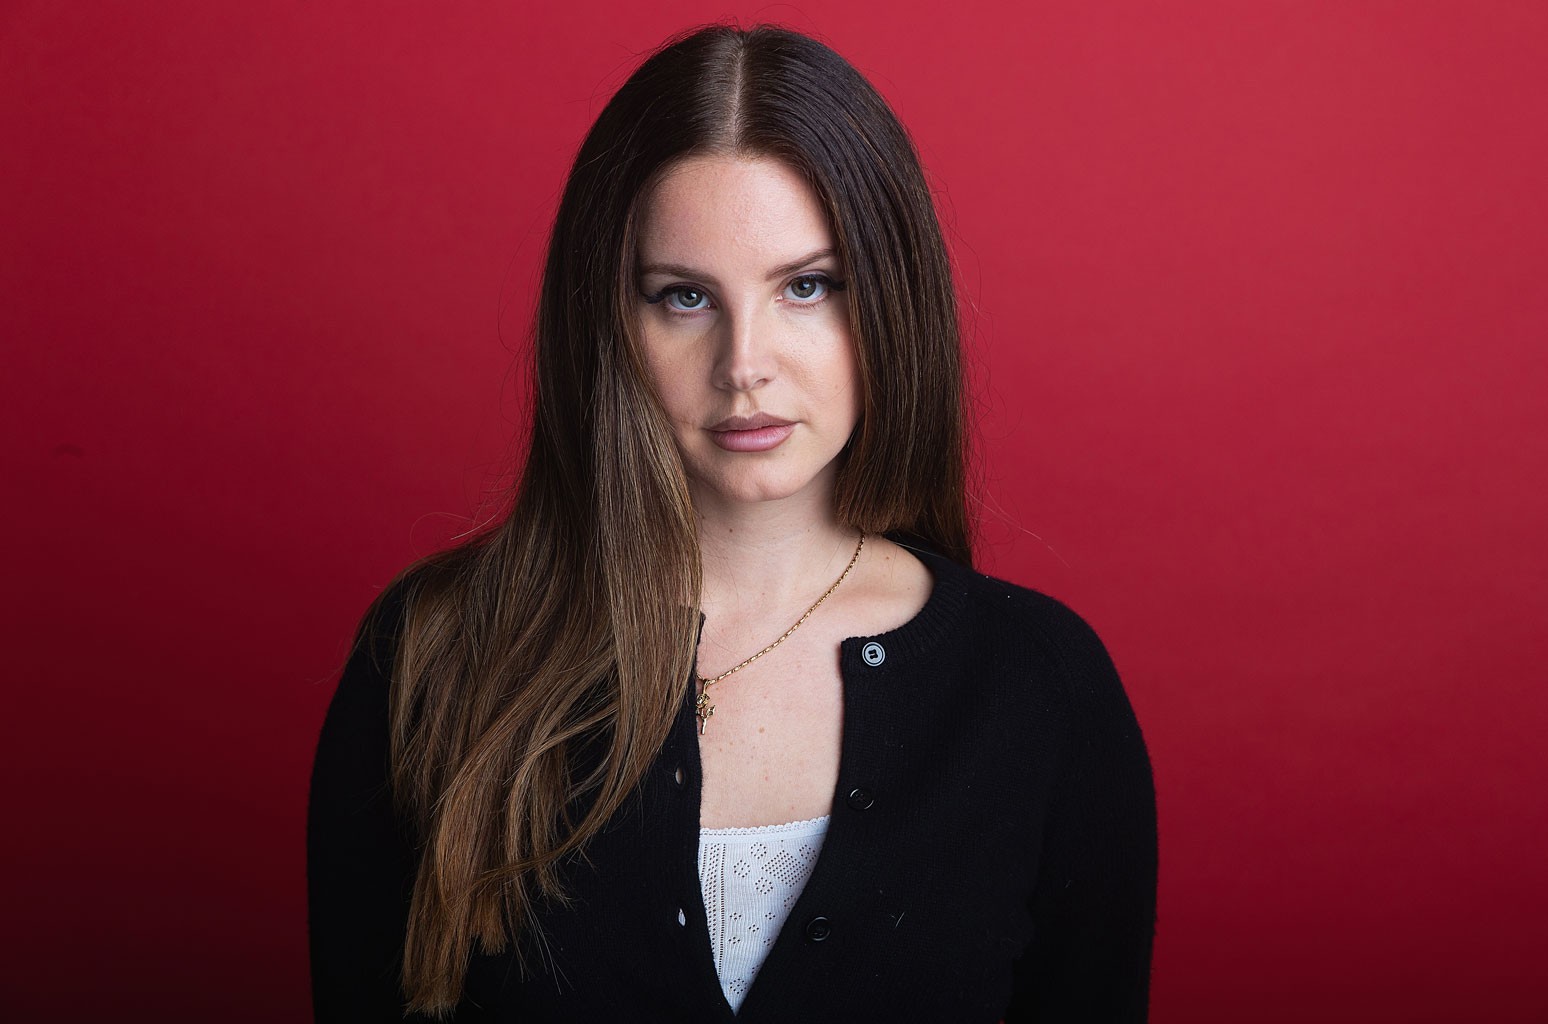 Lana Del Rey Sets New Album 'Blue Banisters' Artist On The Rise